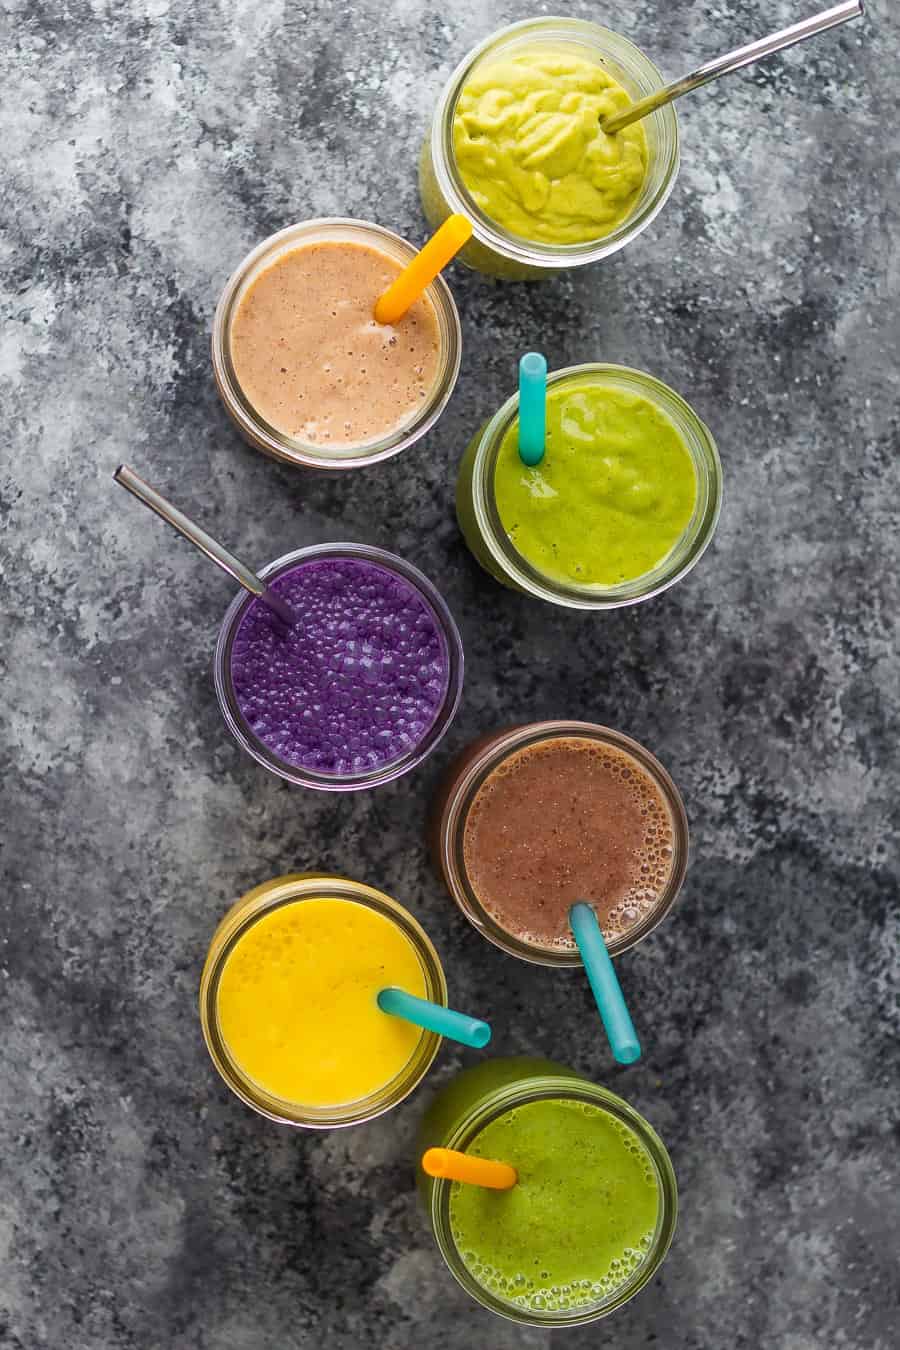 Smoothie Recipes — Good for weight loss 😉